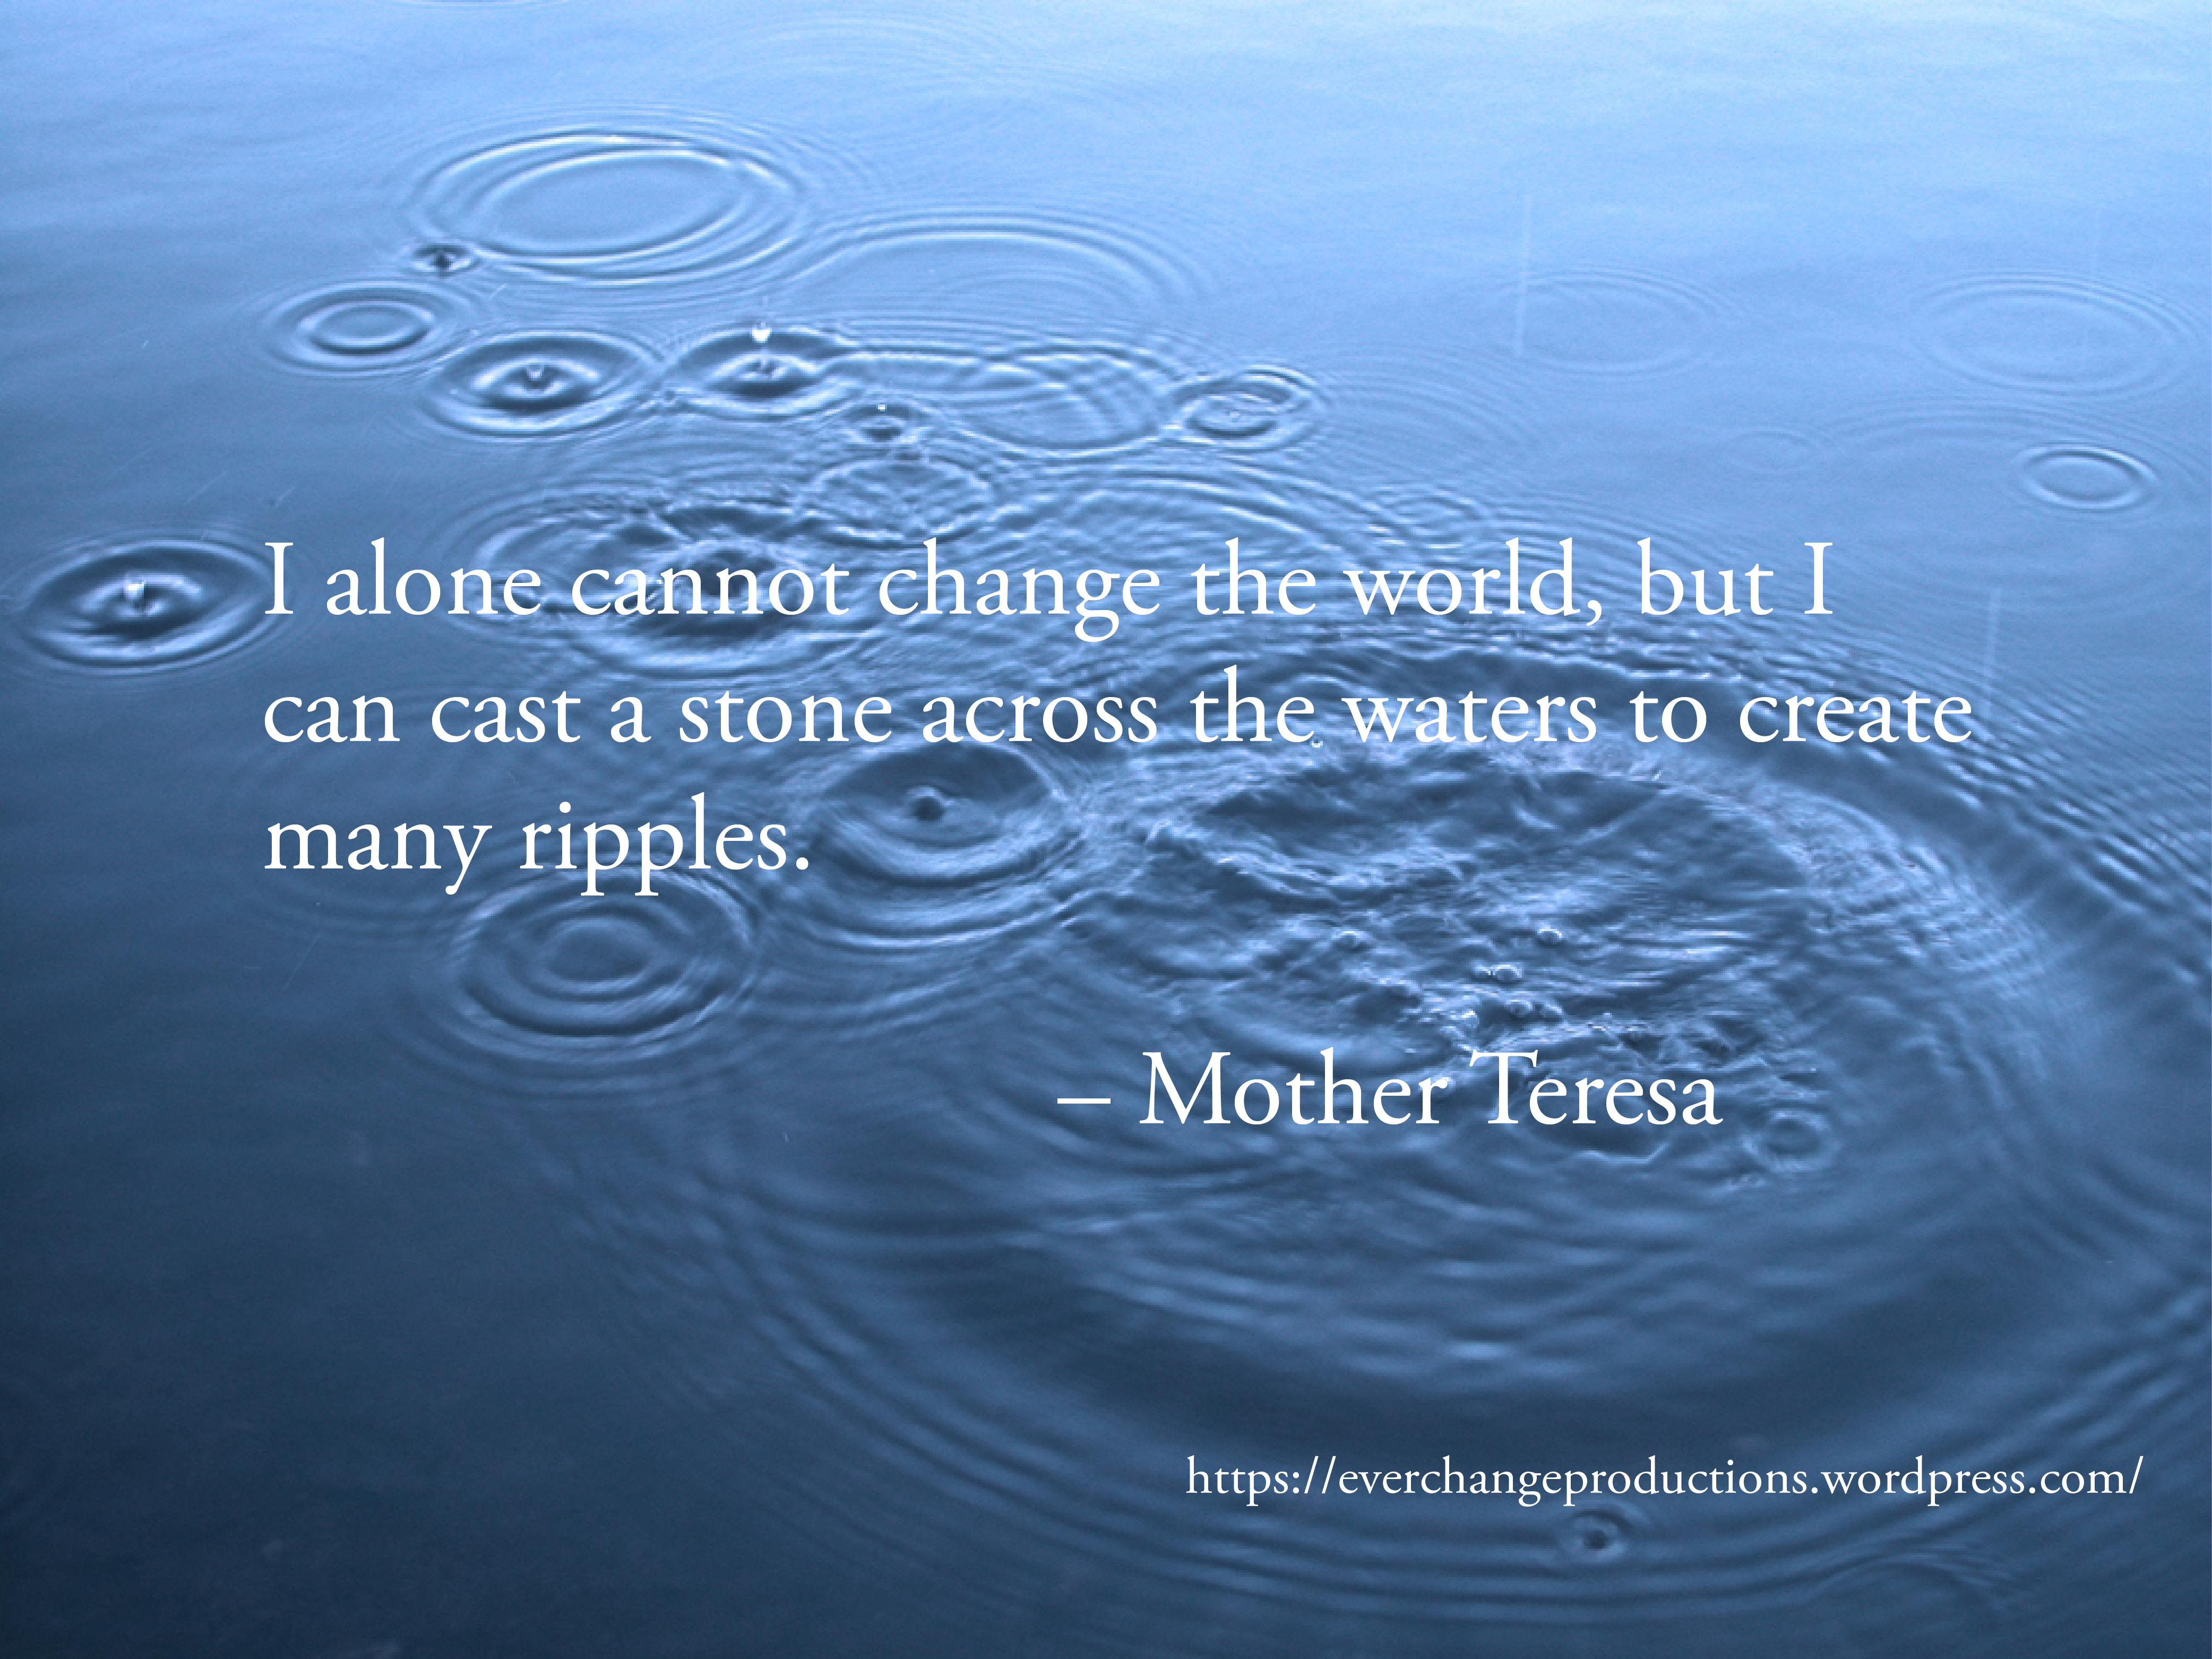 "I alone cannot change the world, but I can cast a stone across the waters to create many ripples." -Mother Teresa motivational quote